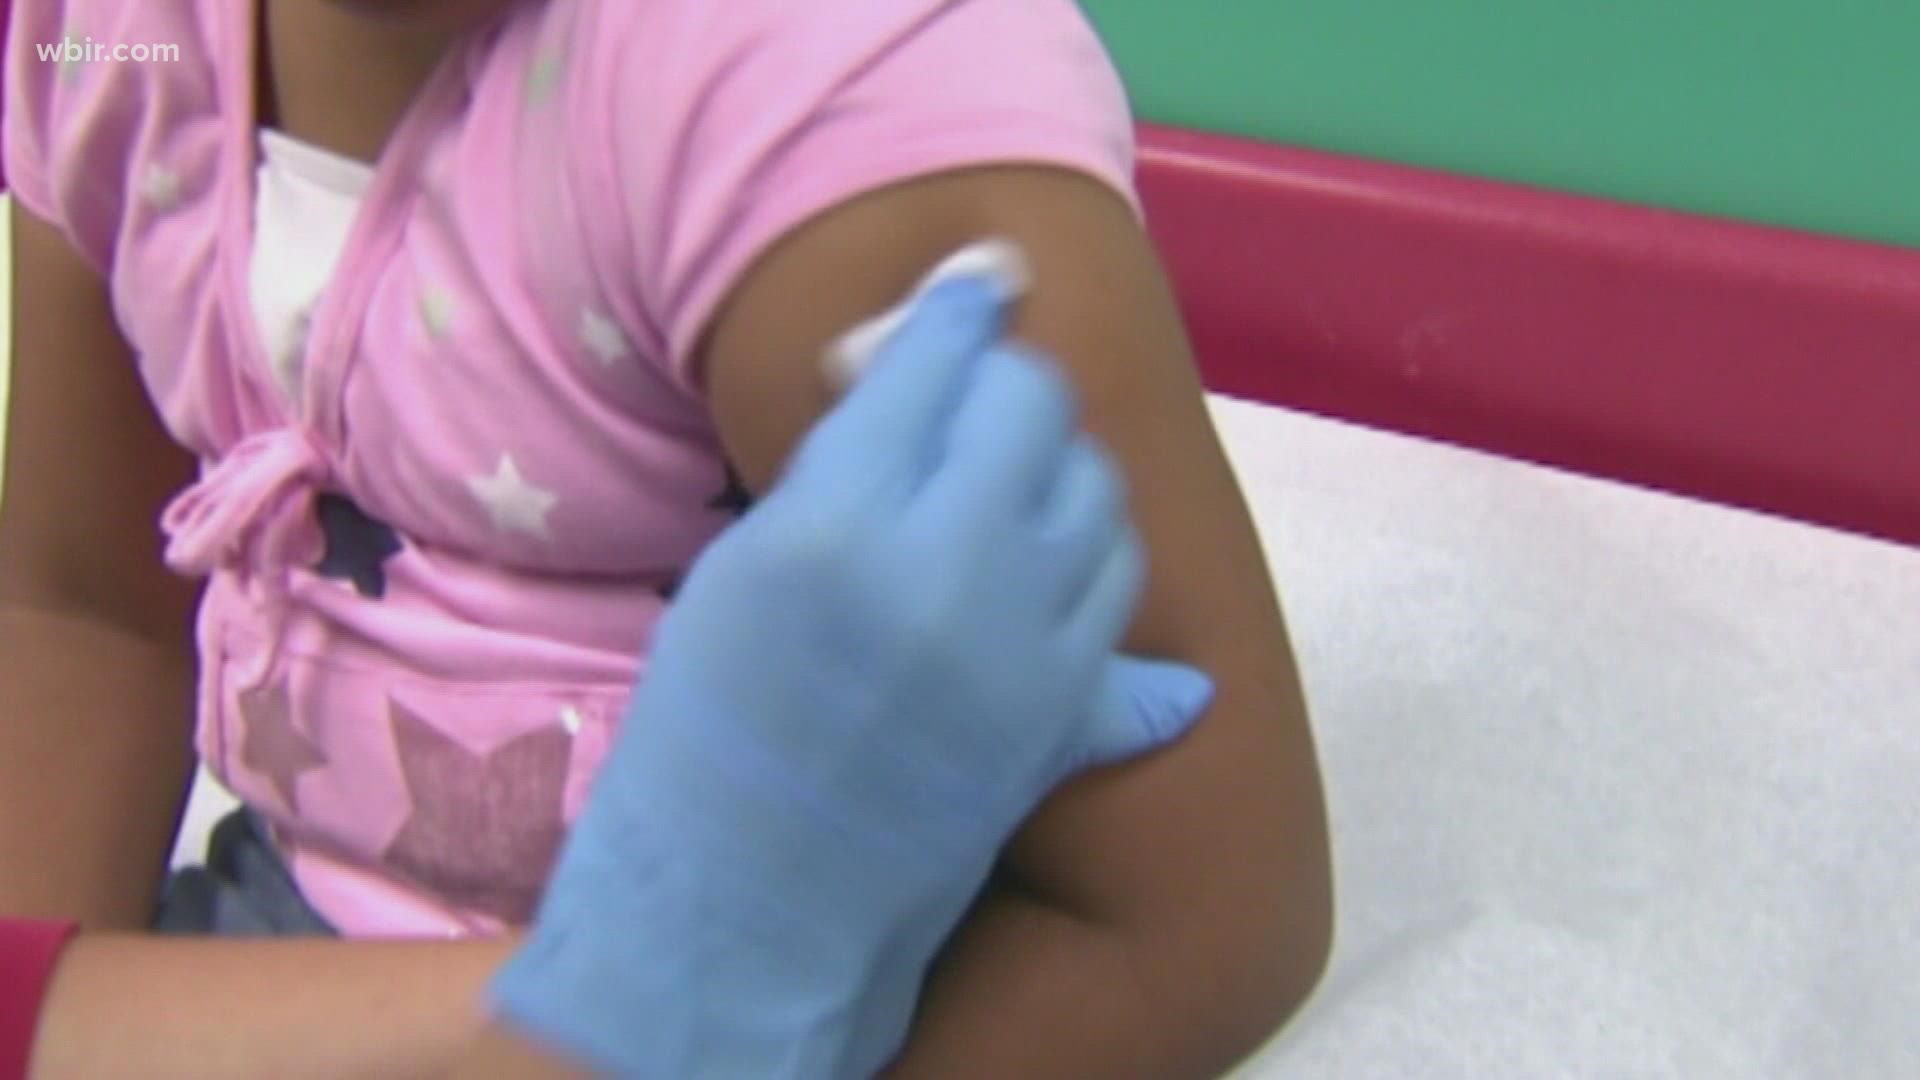 Federal leaders will discuss approving Pfizer's vaccine for children under 12 at the end of October.